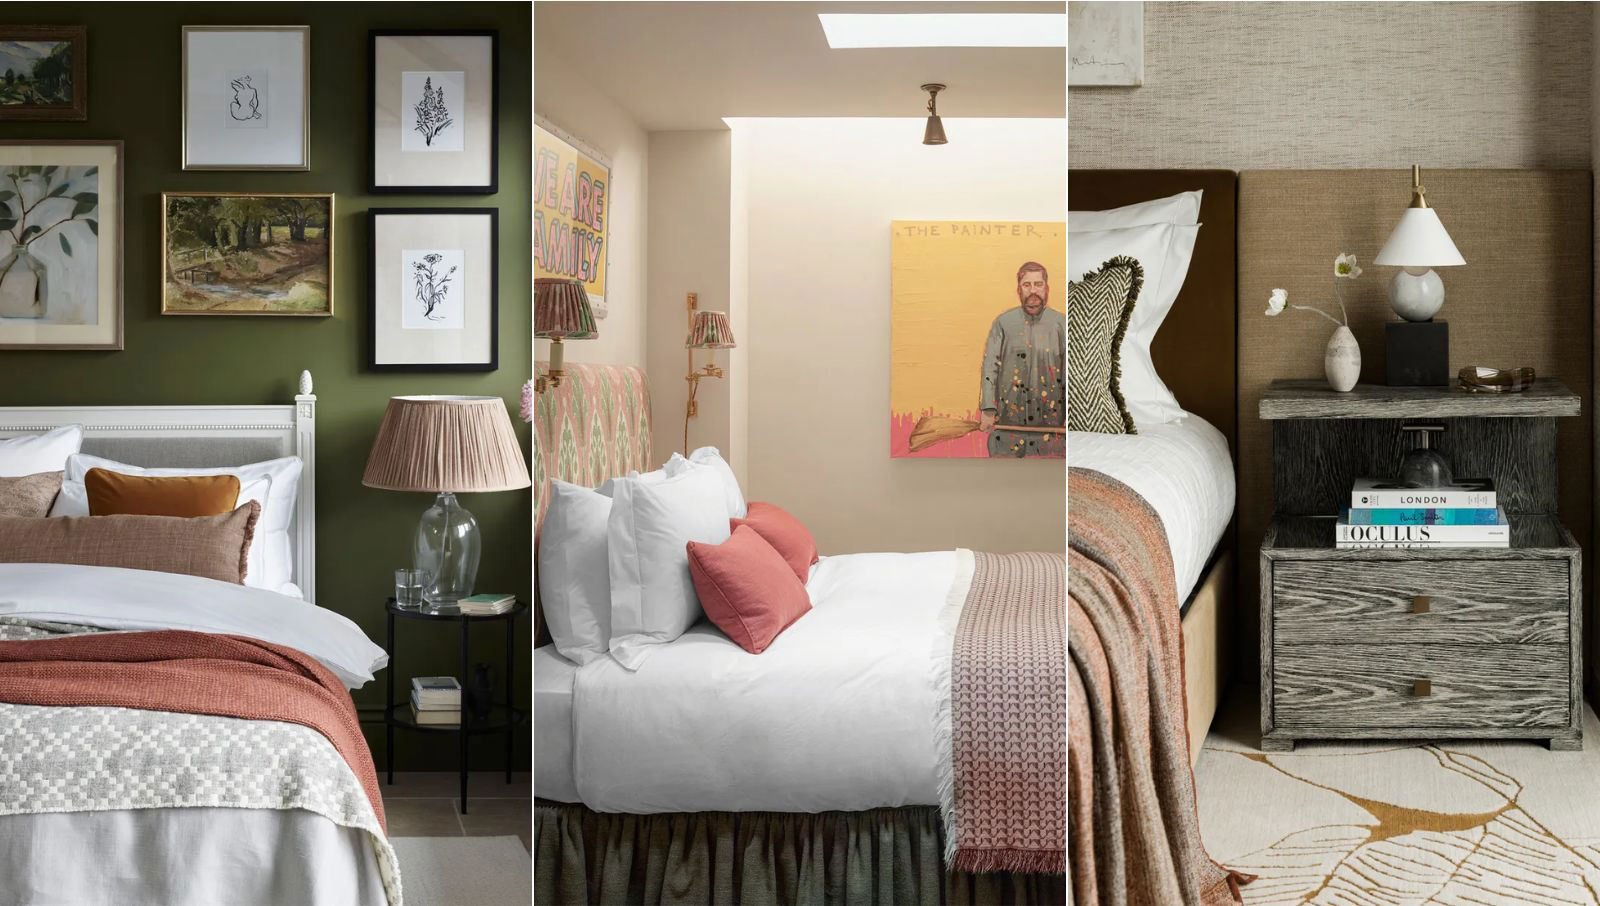 6 simple ways to make a bedroom look more luxurious